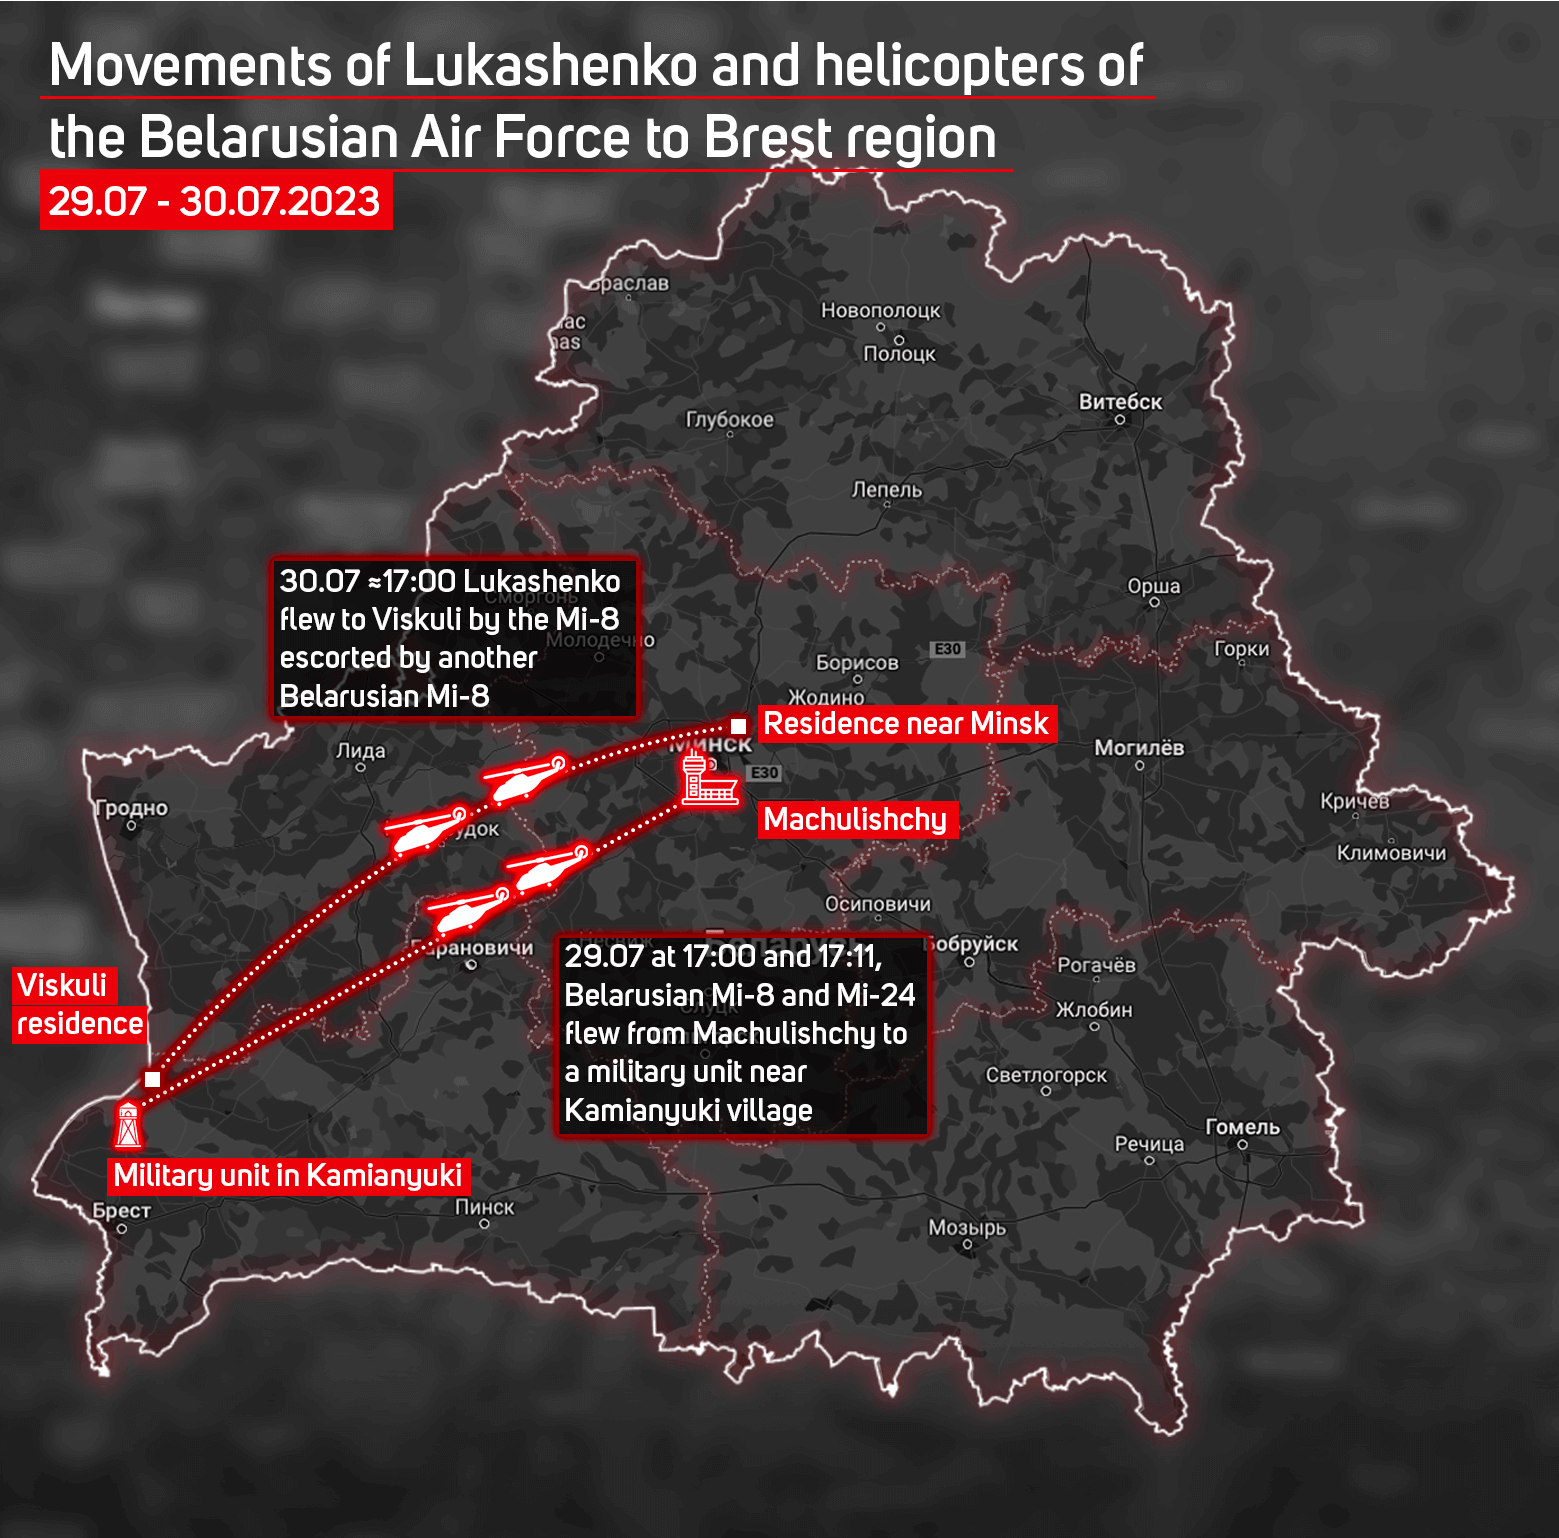 Movements of Lukashenko and helicopters of the Belarusian Air Force to Brest region (29.07 - 30.07.2023)